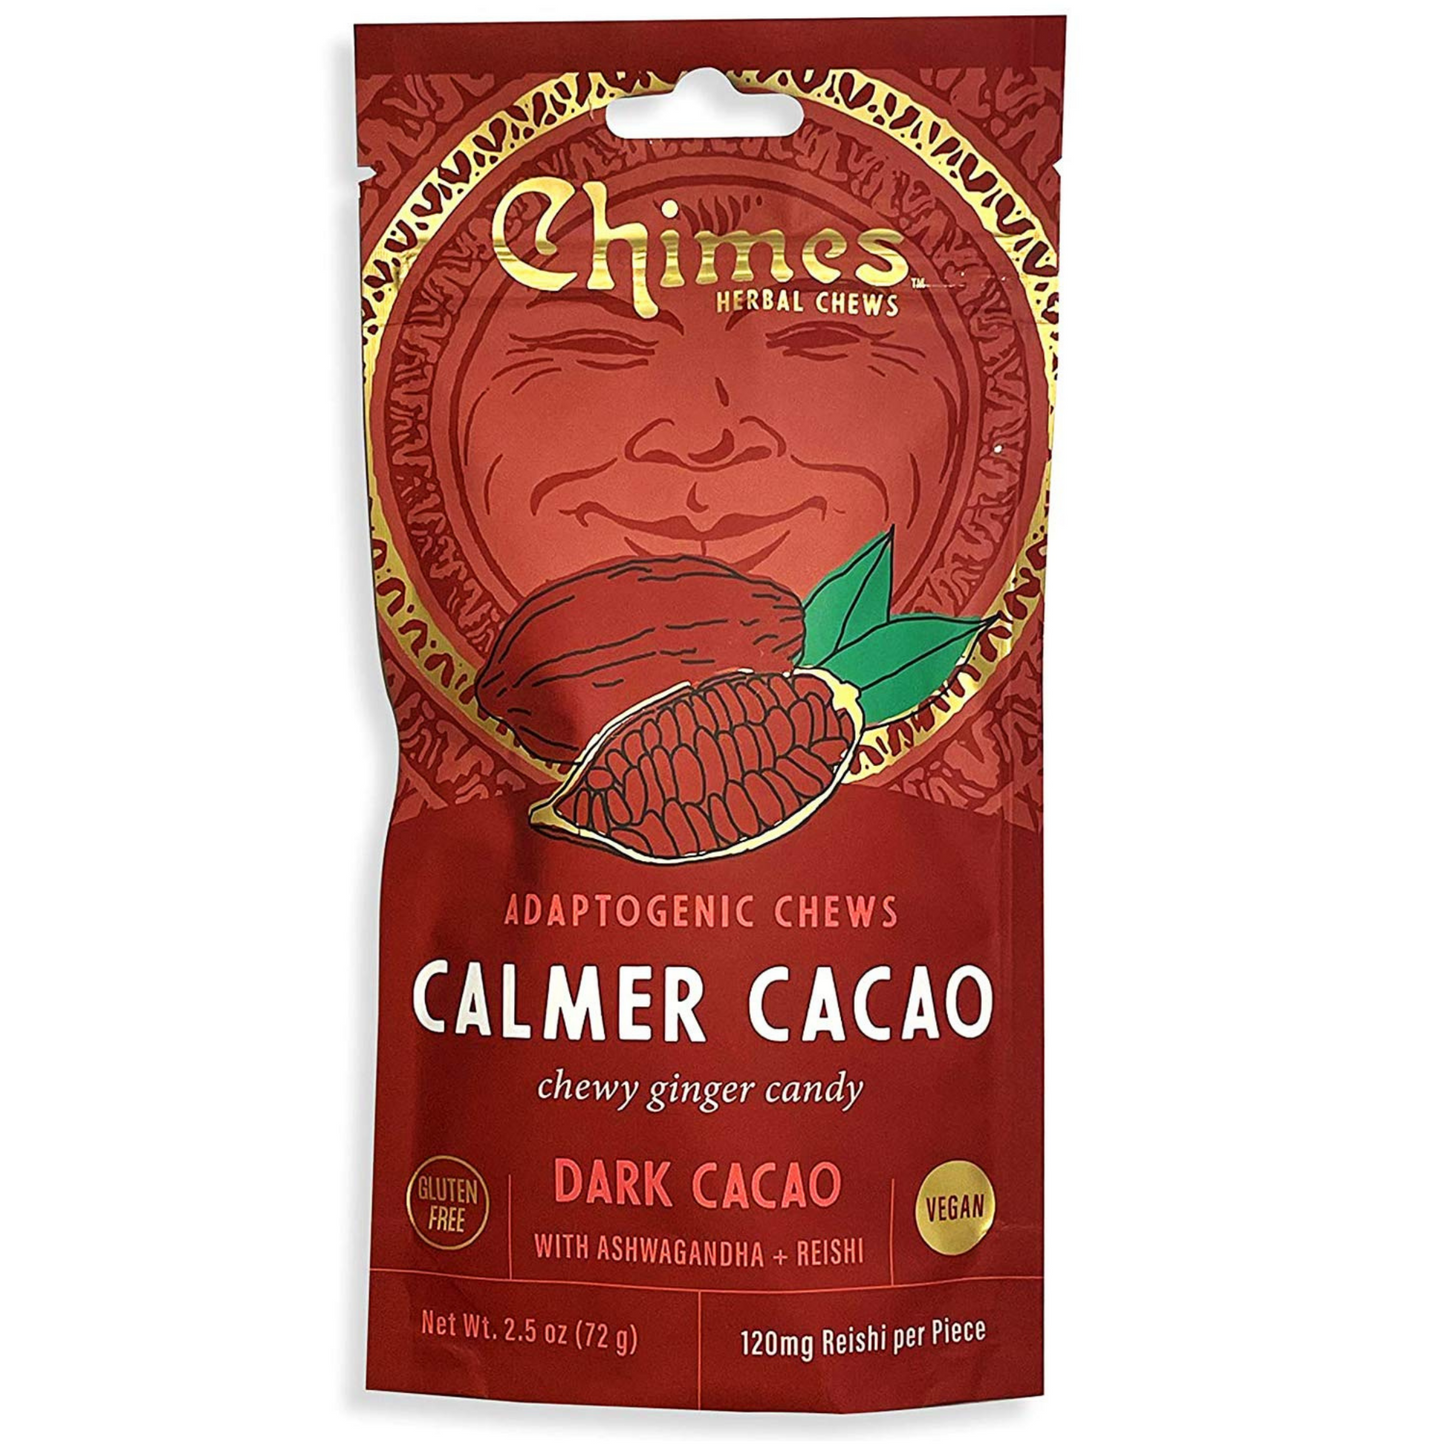 Primary Image of Calmer Cacao Adaptogenic Ginger Chews